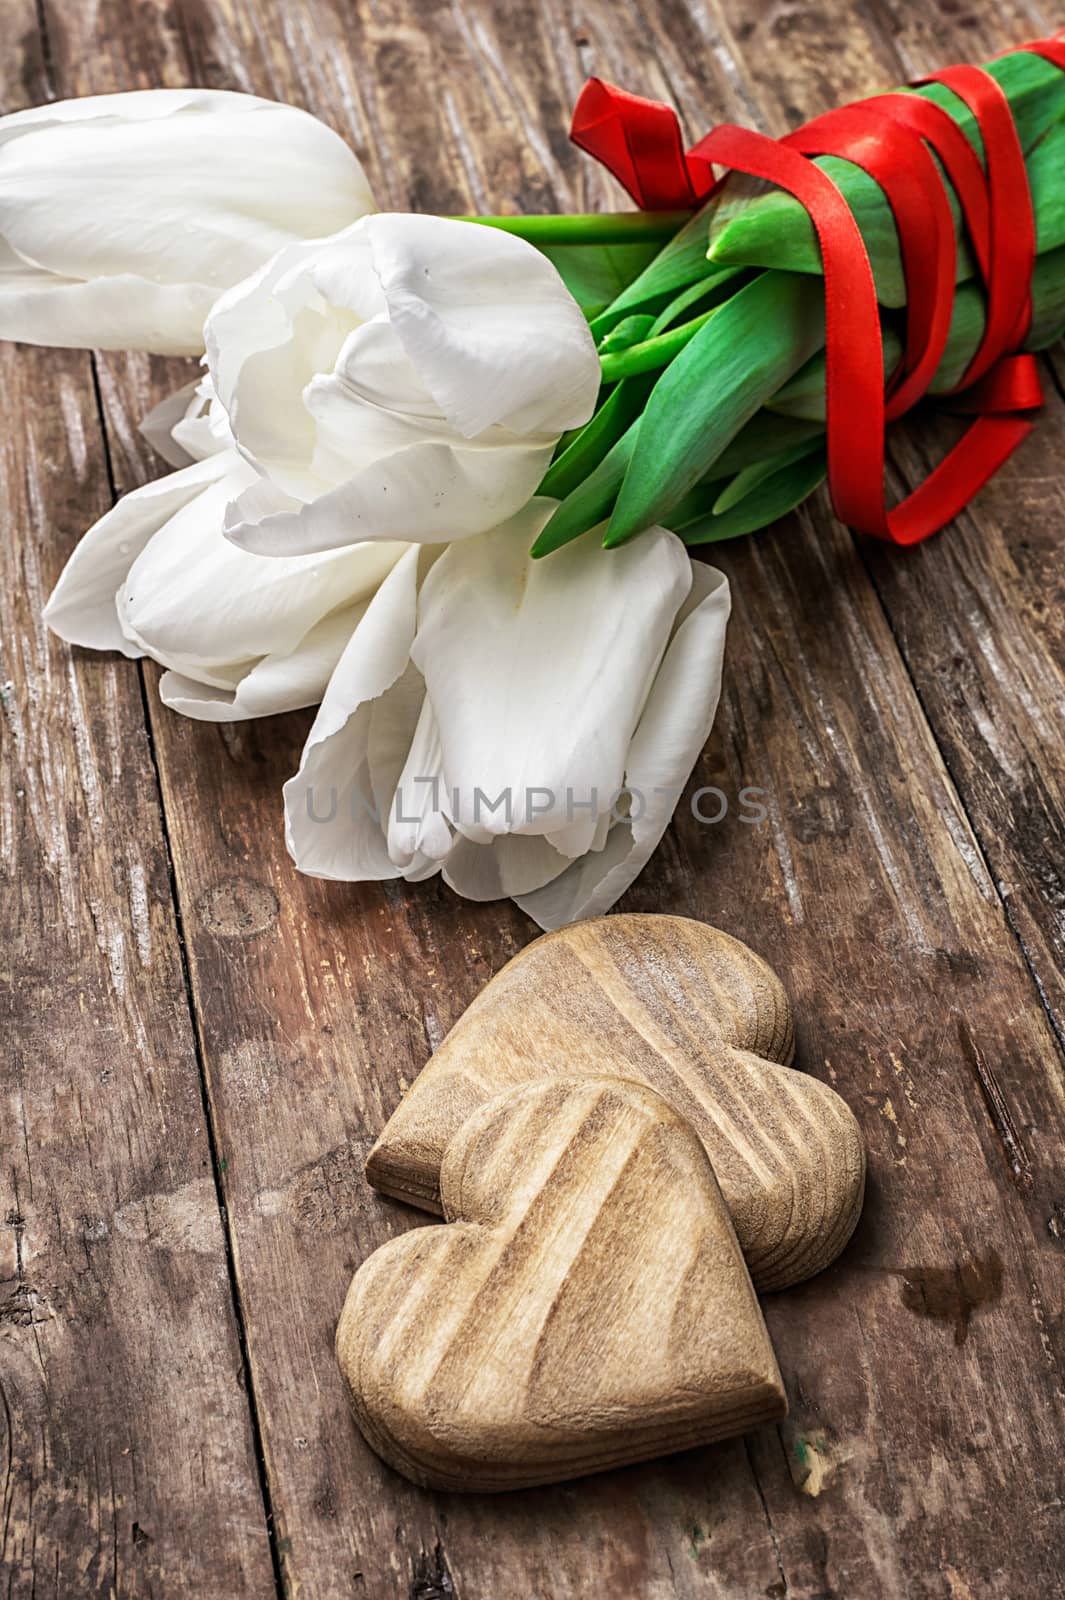 bouquet of tulips bright color and symbolic wooden heart